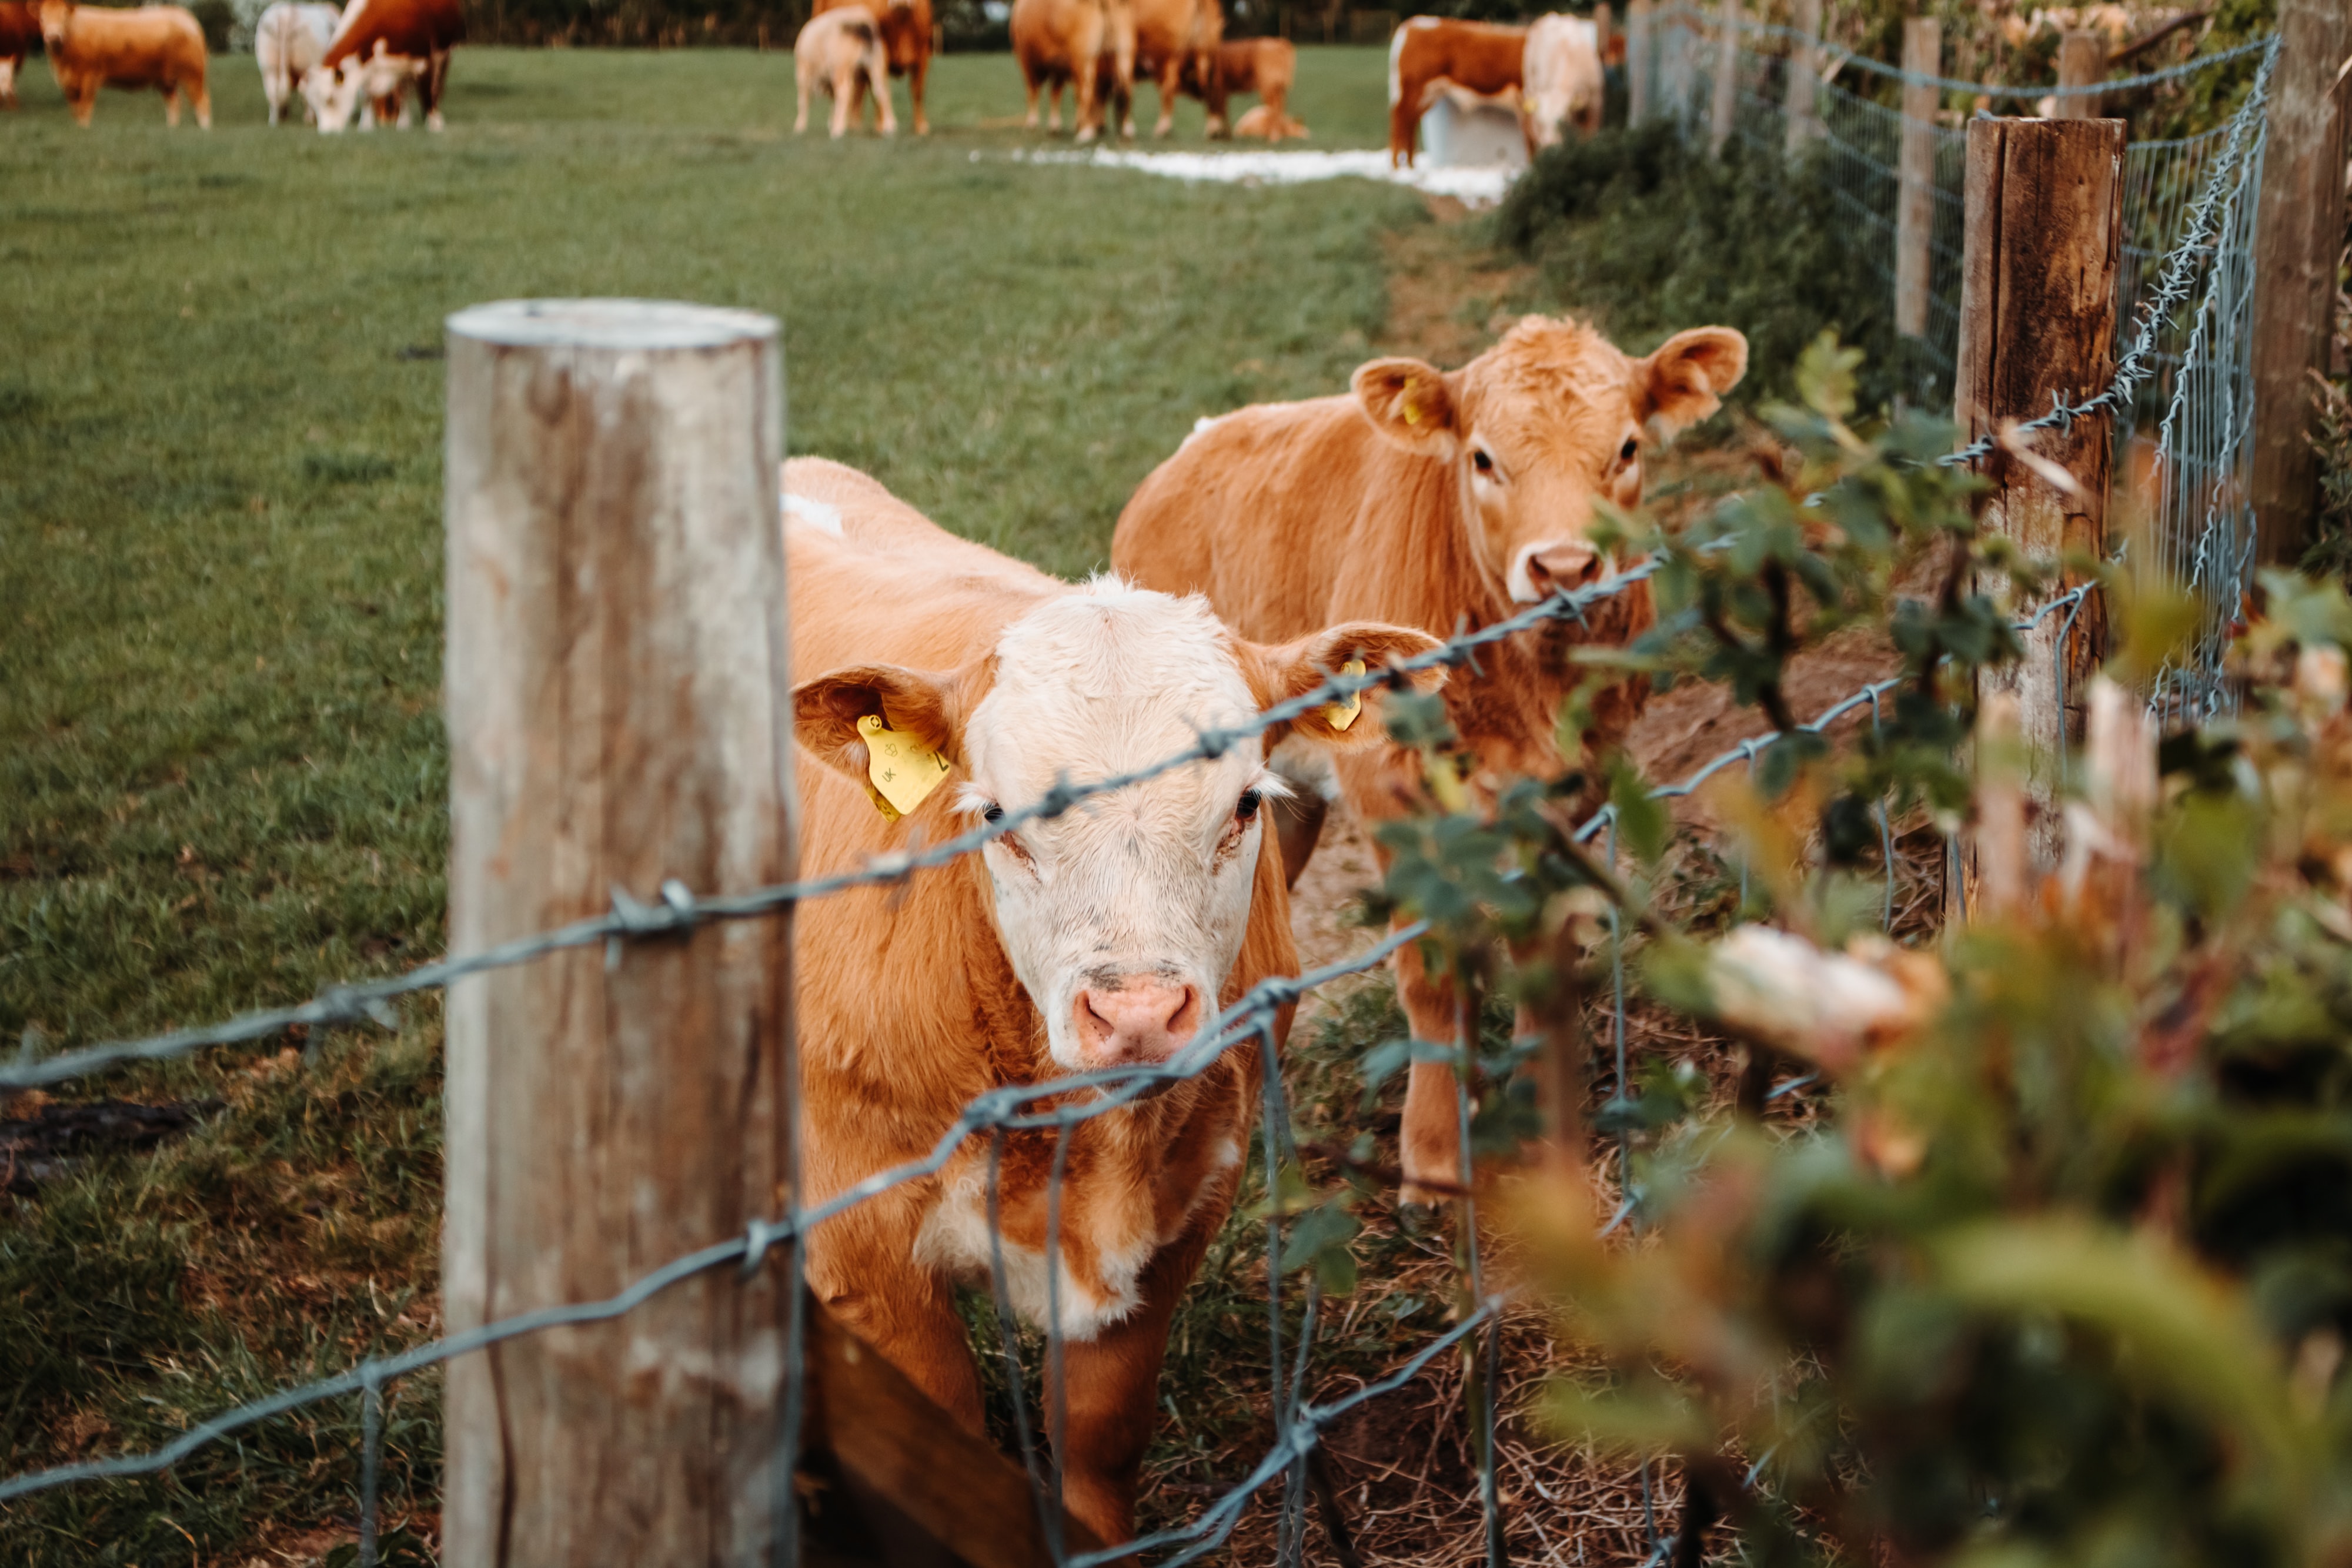 Two cattle peering through wire fence